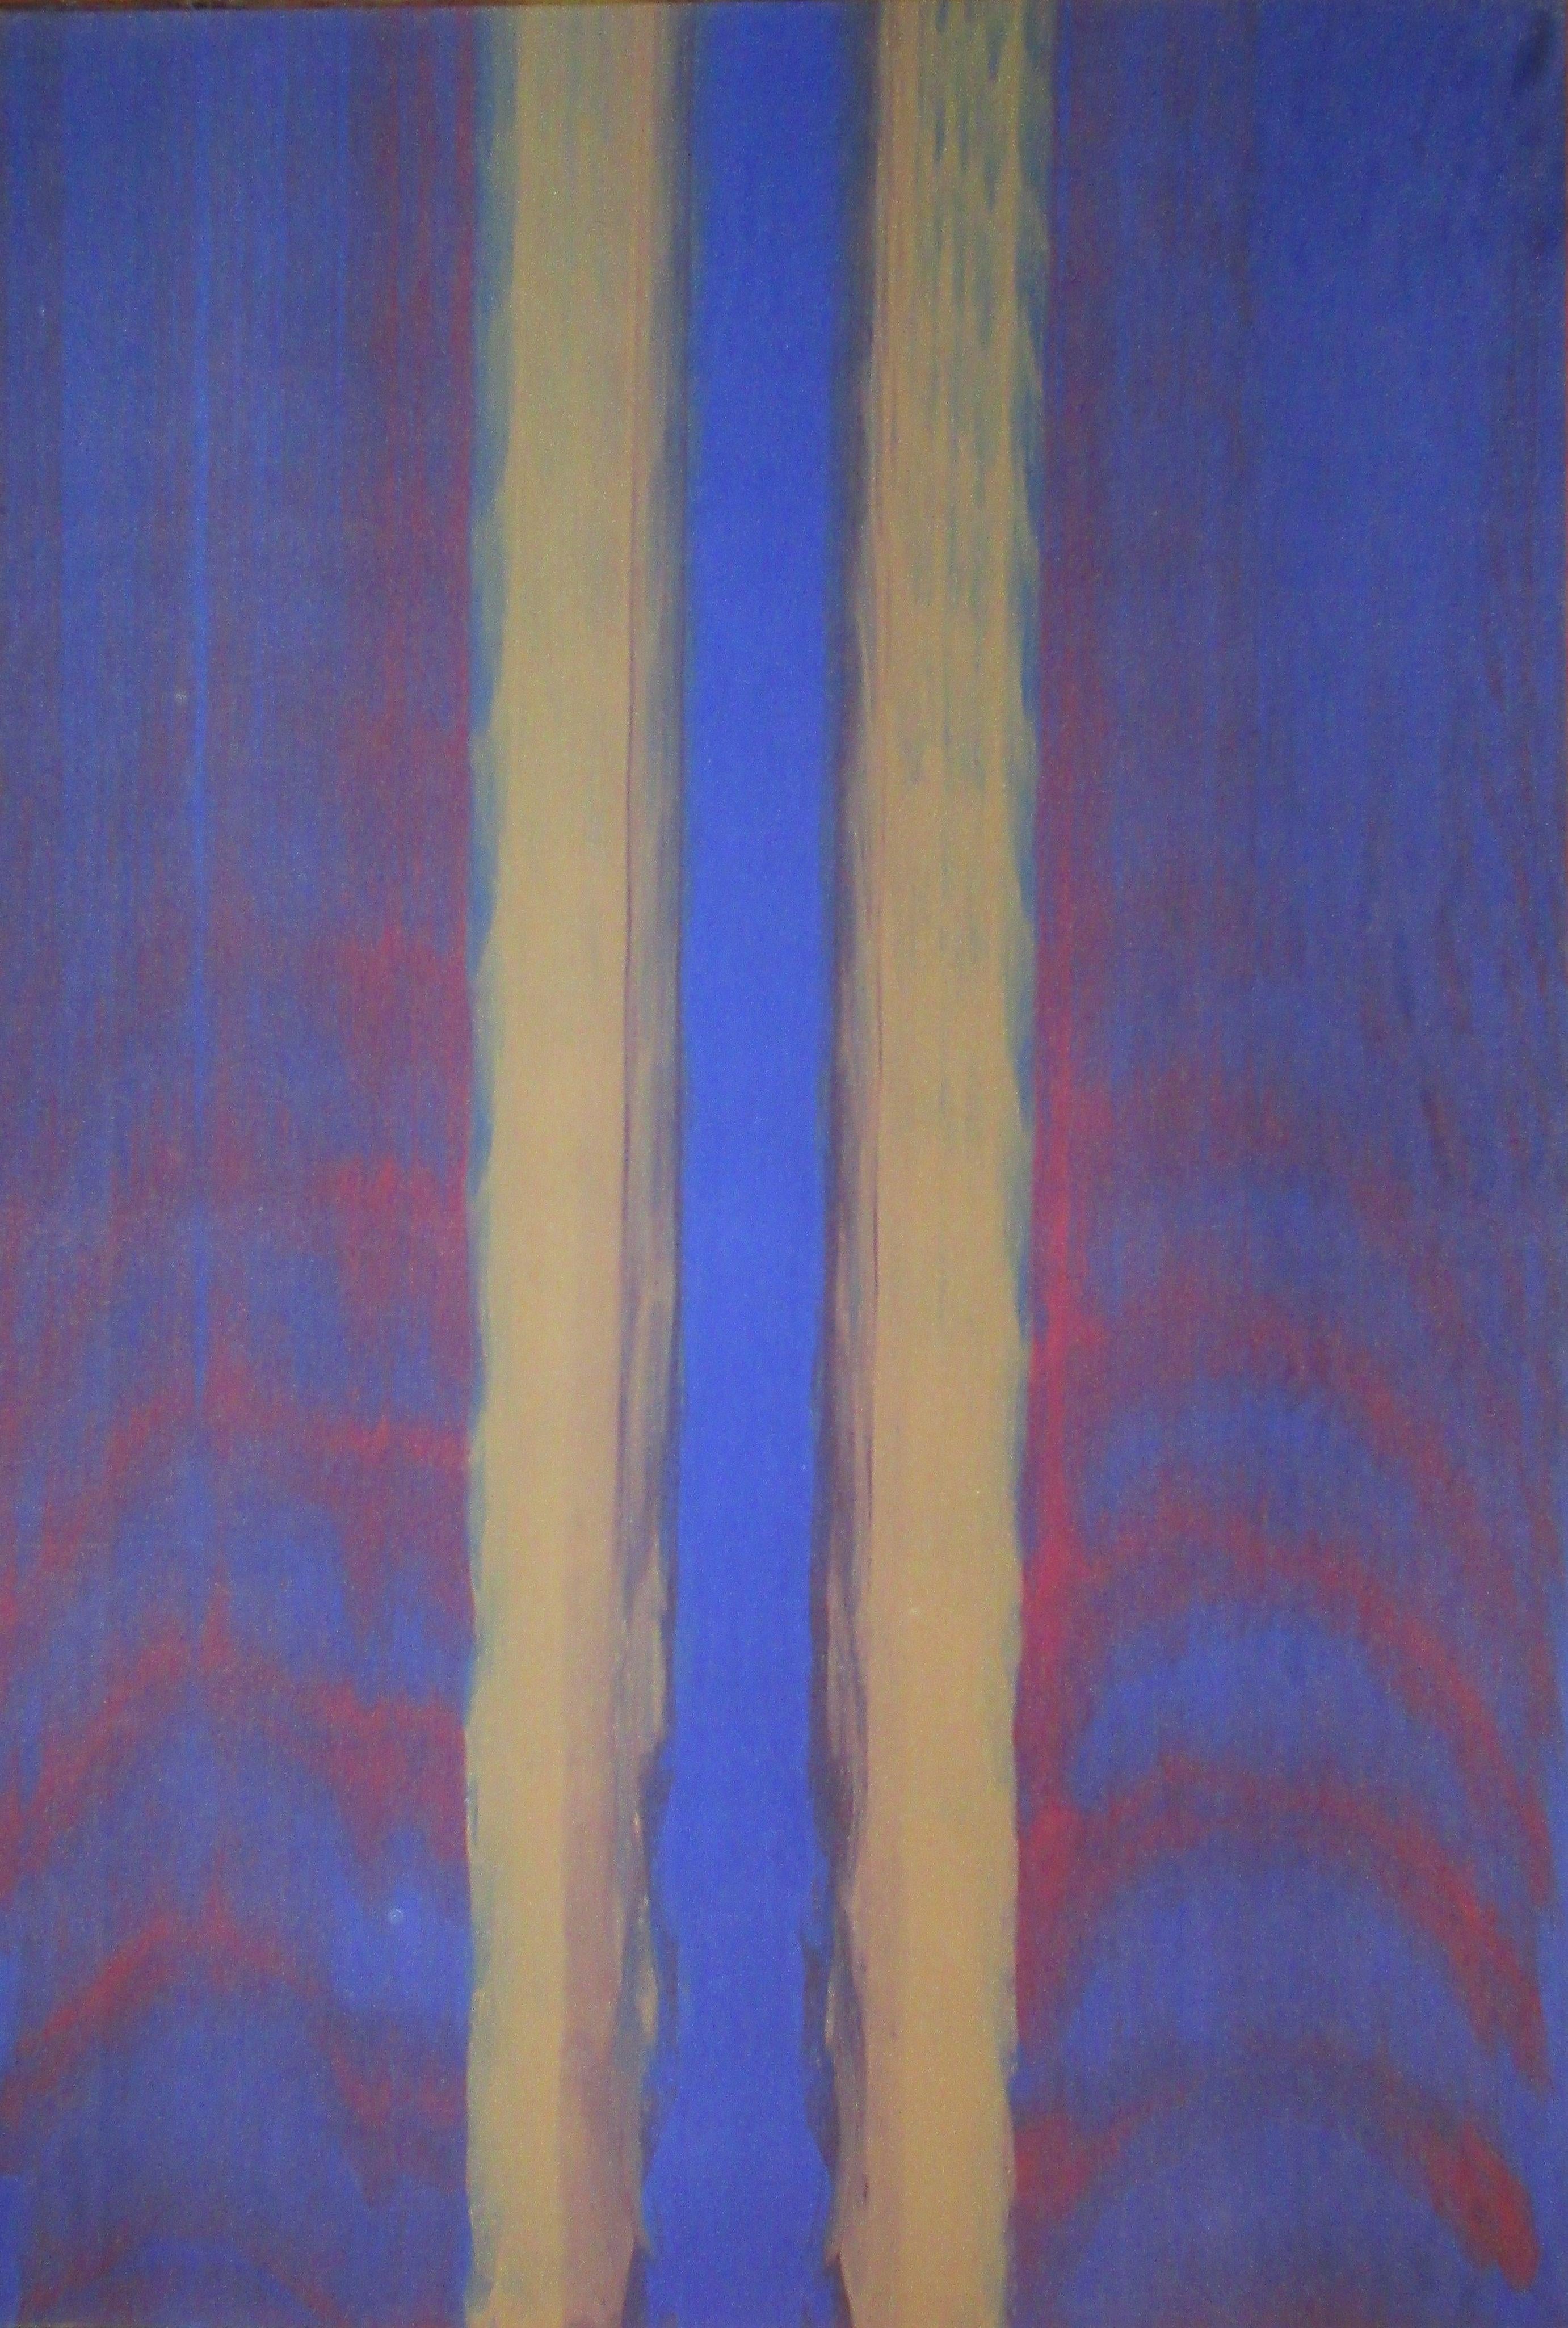 Gene Hedge
Inside Blue, 1966
Acrylic on canvas
61 1/4 x 43 3/4 inches
(P124)

Gene Hedge was born (1928) and raised in rural Indiana. After military service, he briefly attended Ball State University in Muncie, Indiana. There he encountered the